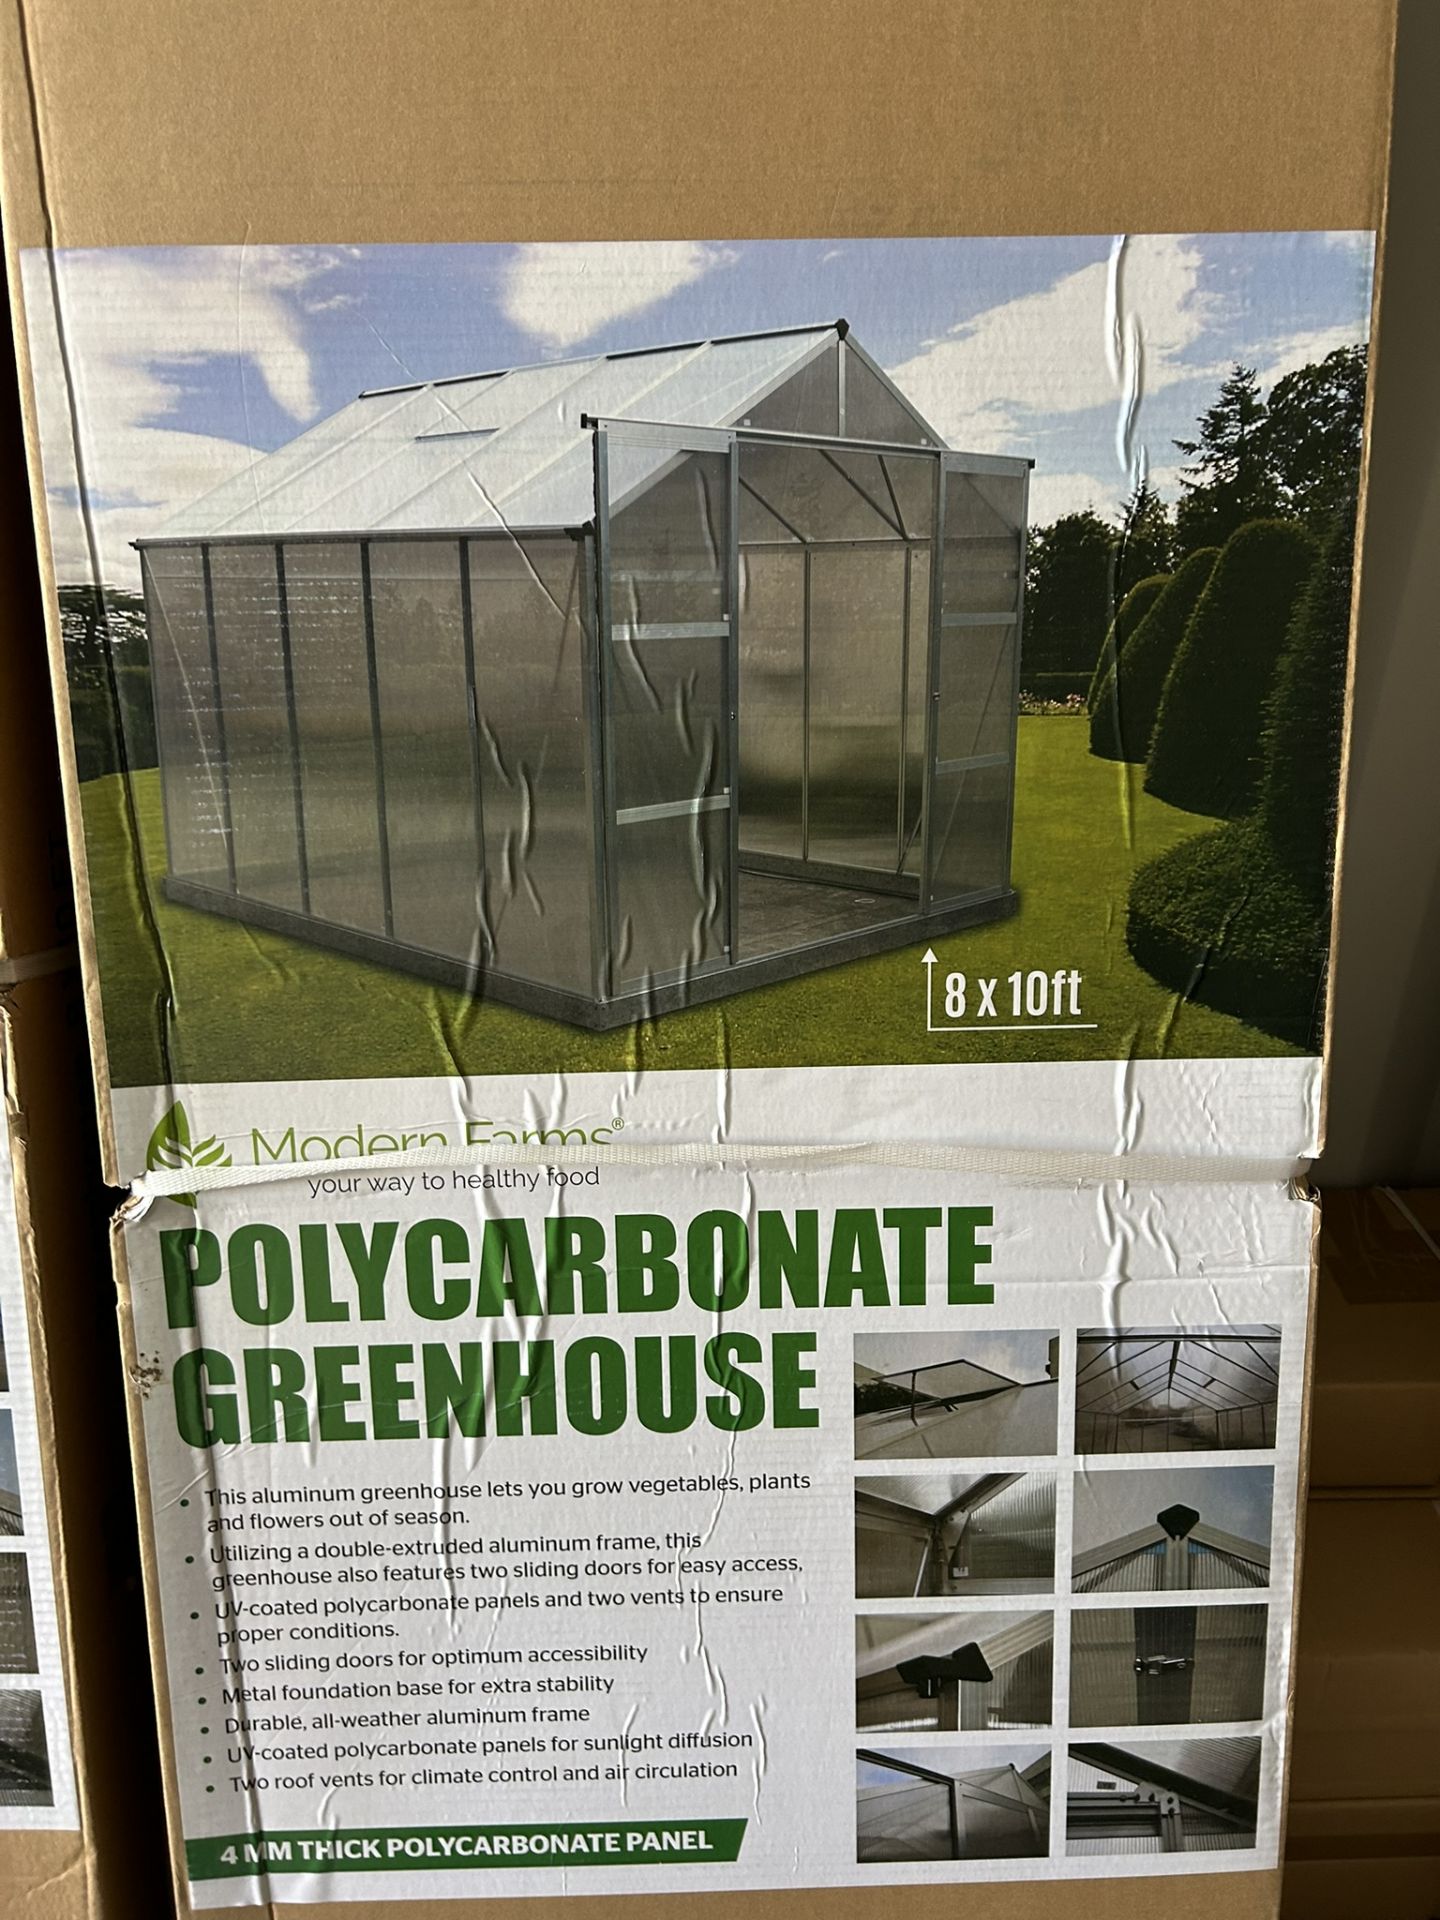 8x10 POLY CARBONATE GREENHOUSE